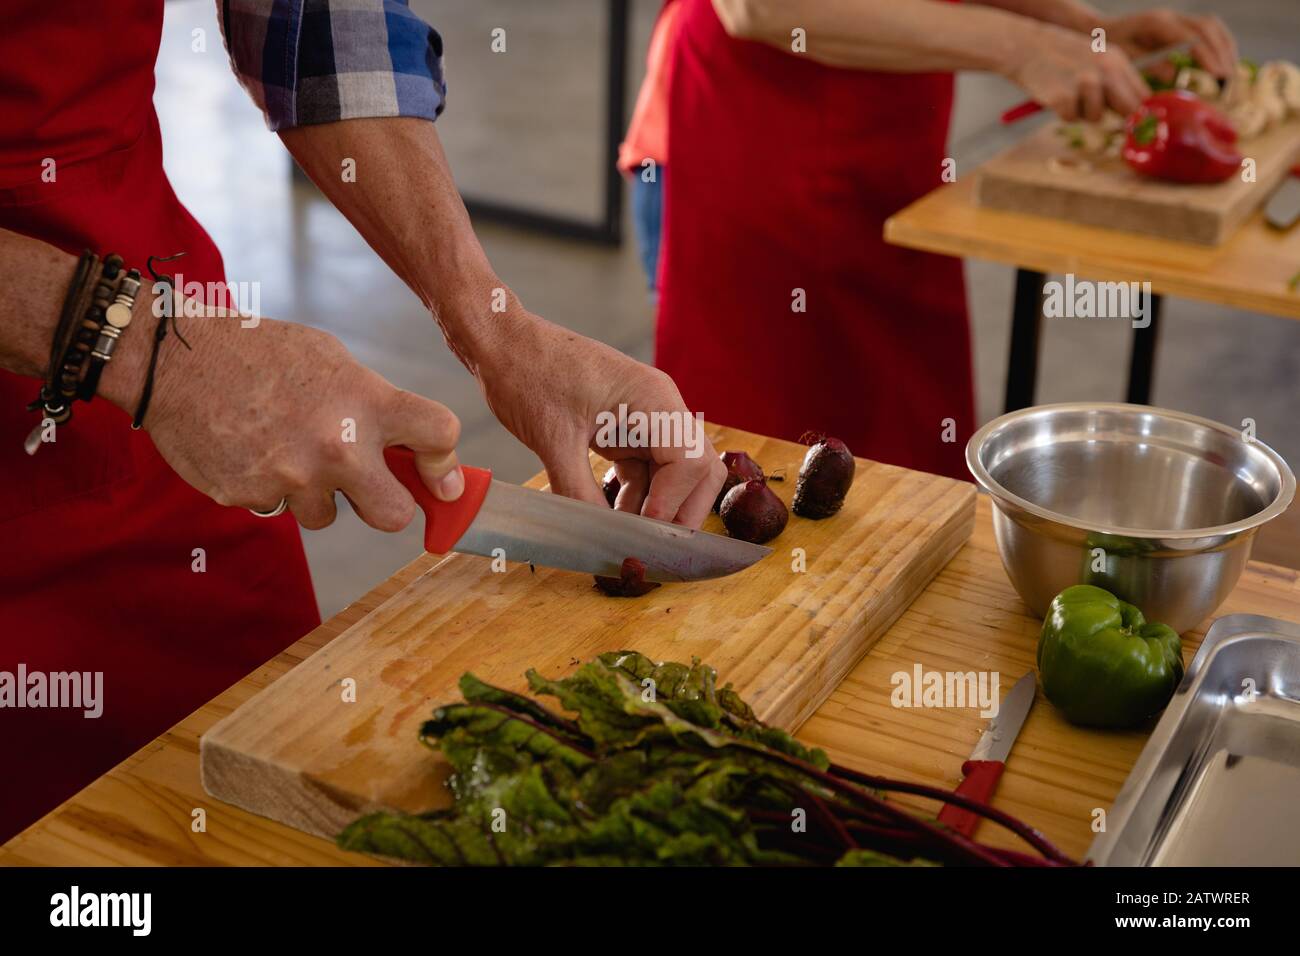 Chefs cooking together Stock Photo